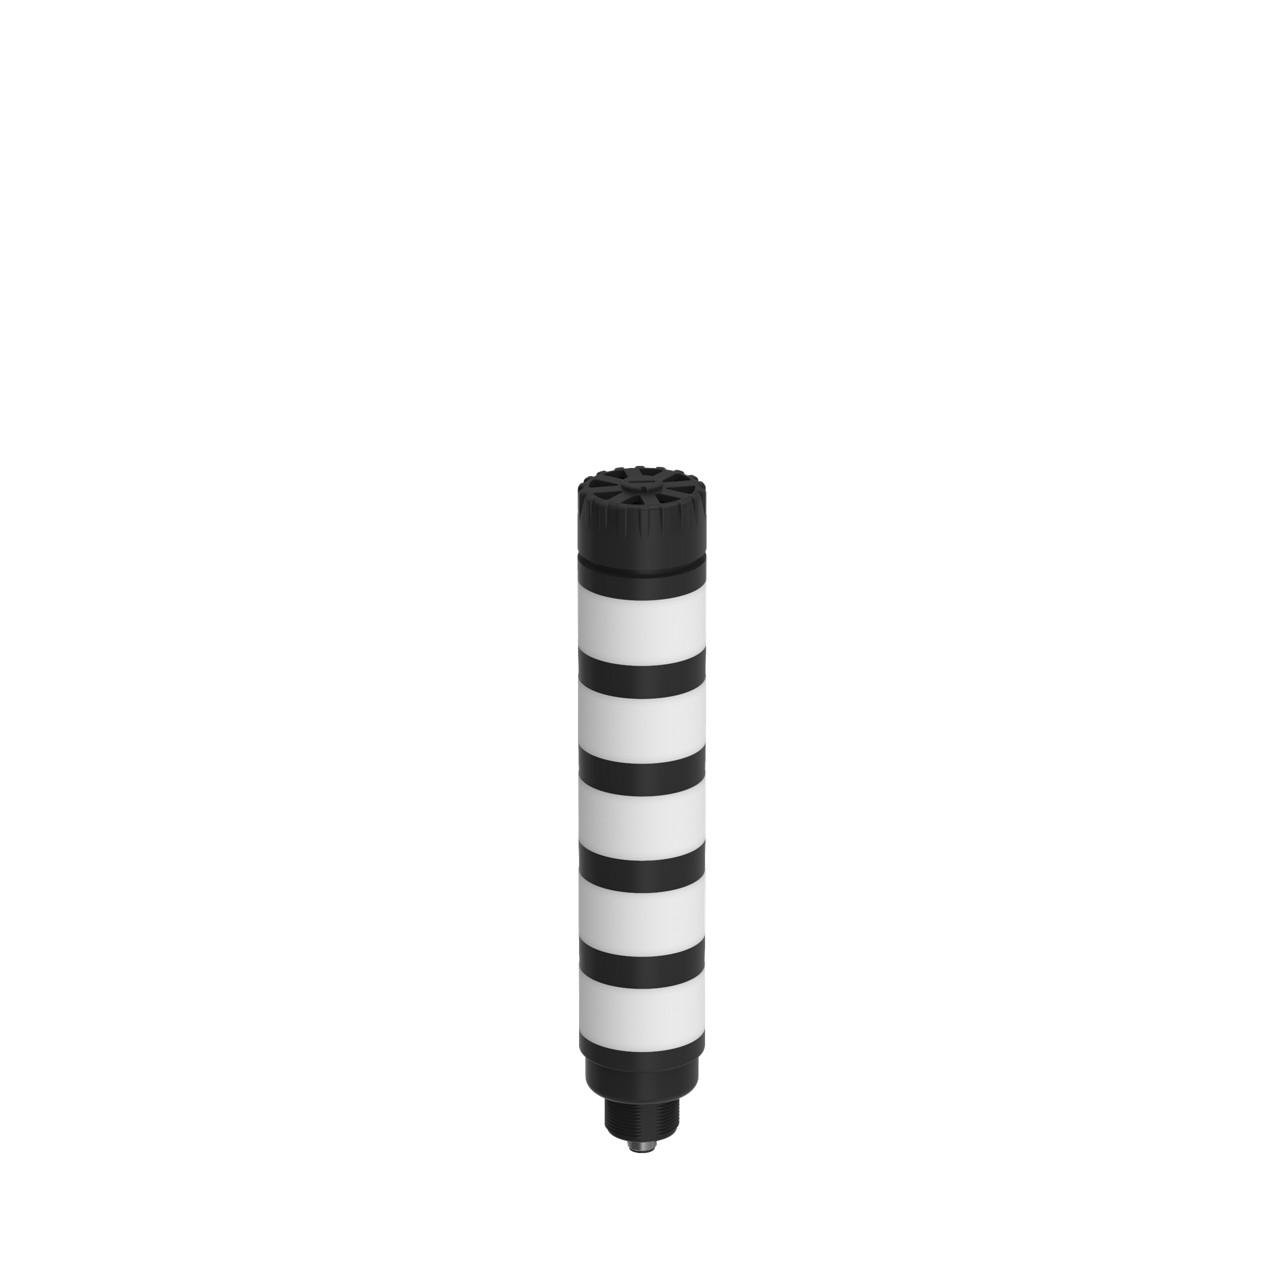 Banner TL50P5AQ TL50 Pro Tower Light with Audible, Standard Black Housing: 5 Segment, Voltage: 10-30 V dc; Environ. Rating: IP50, Colors: Multicolor, Euro 8-Pin Quick Disconnect